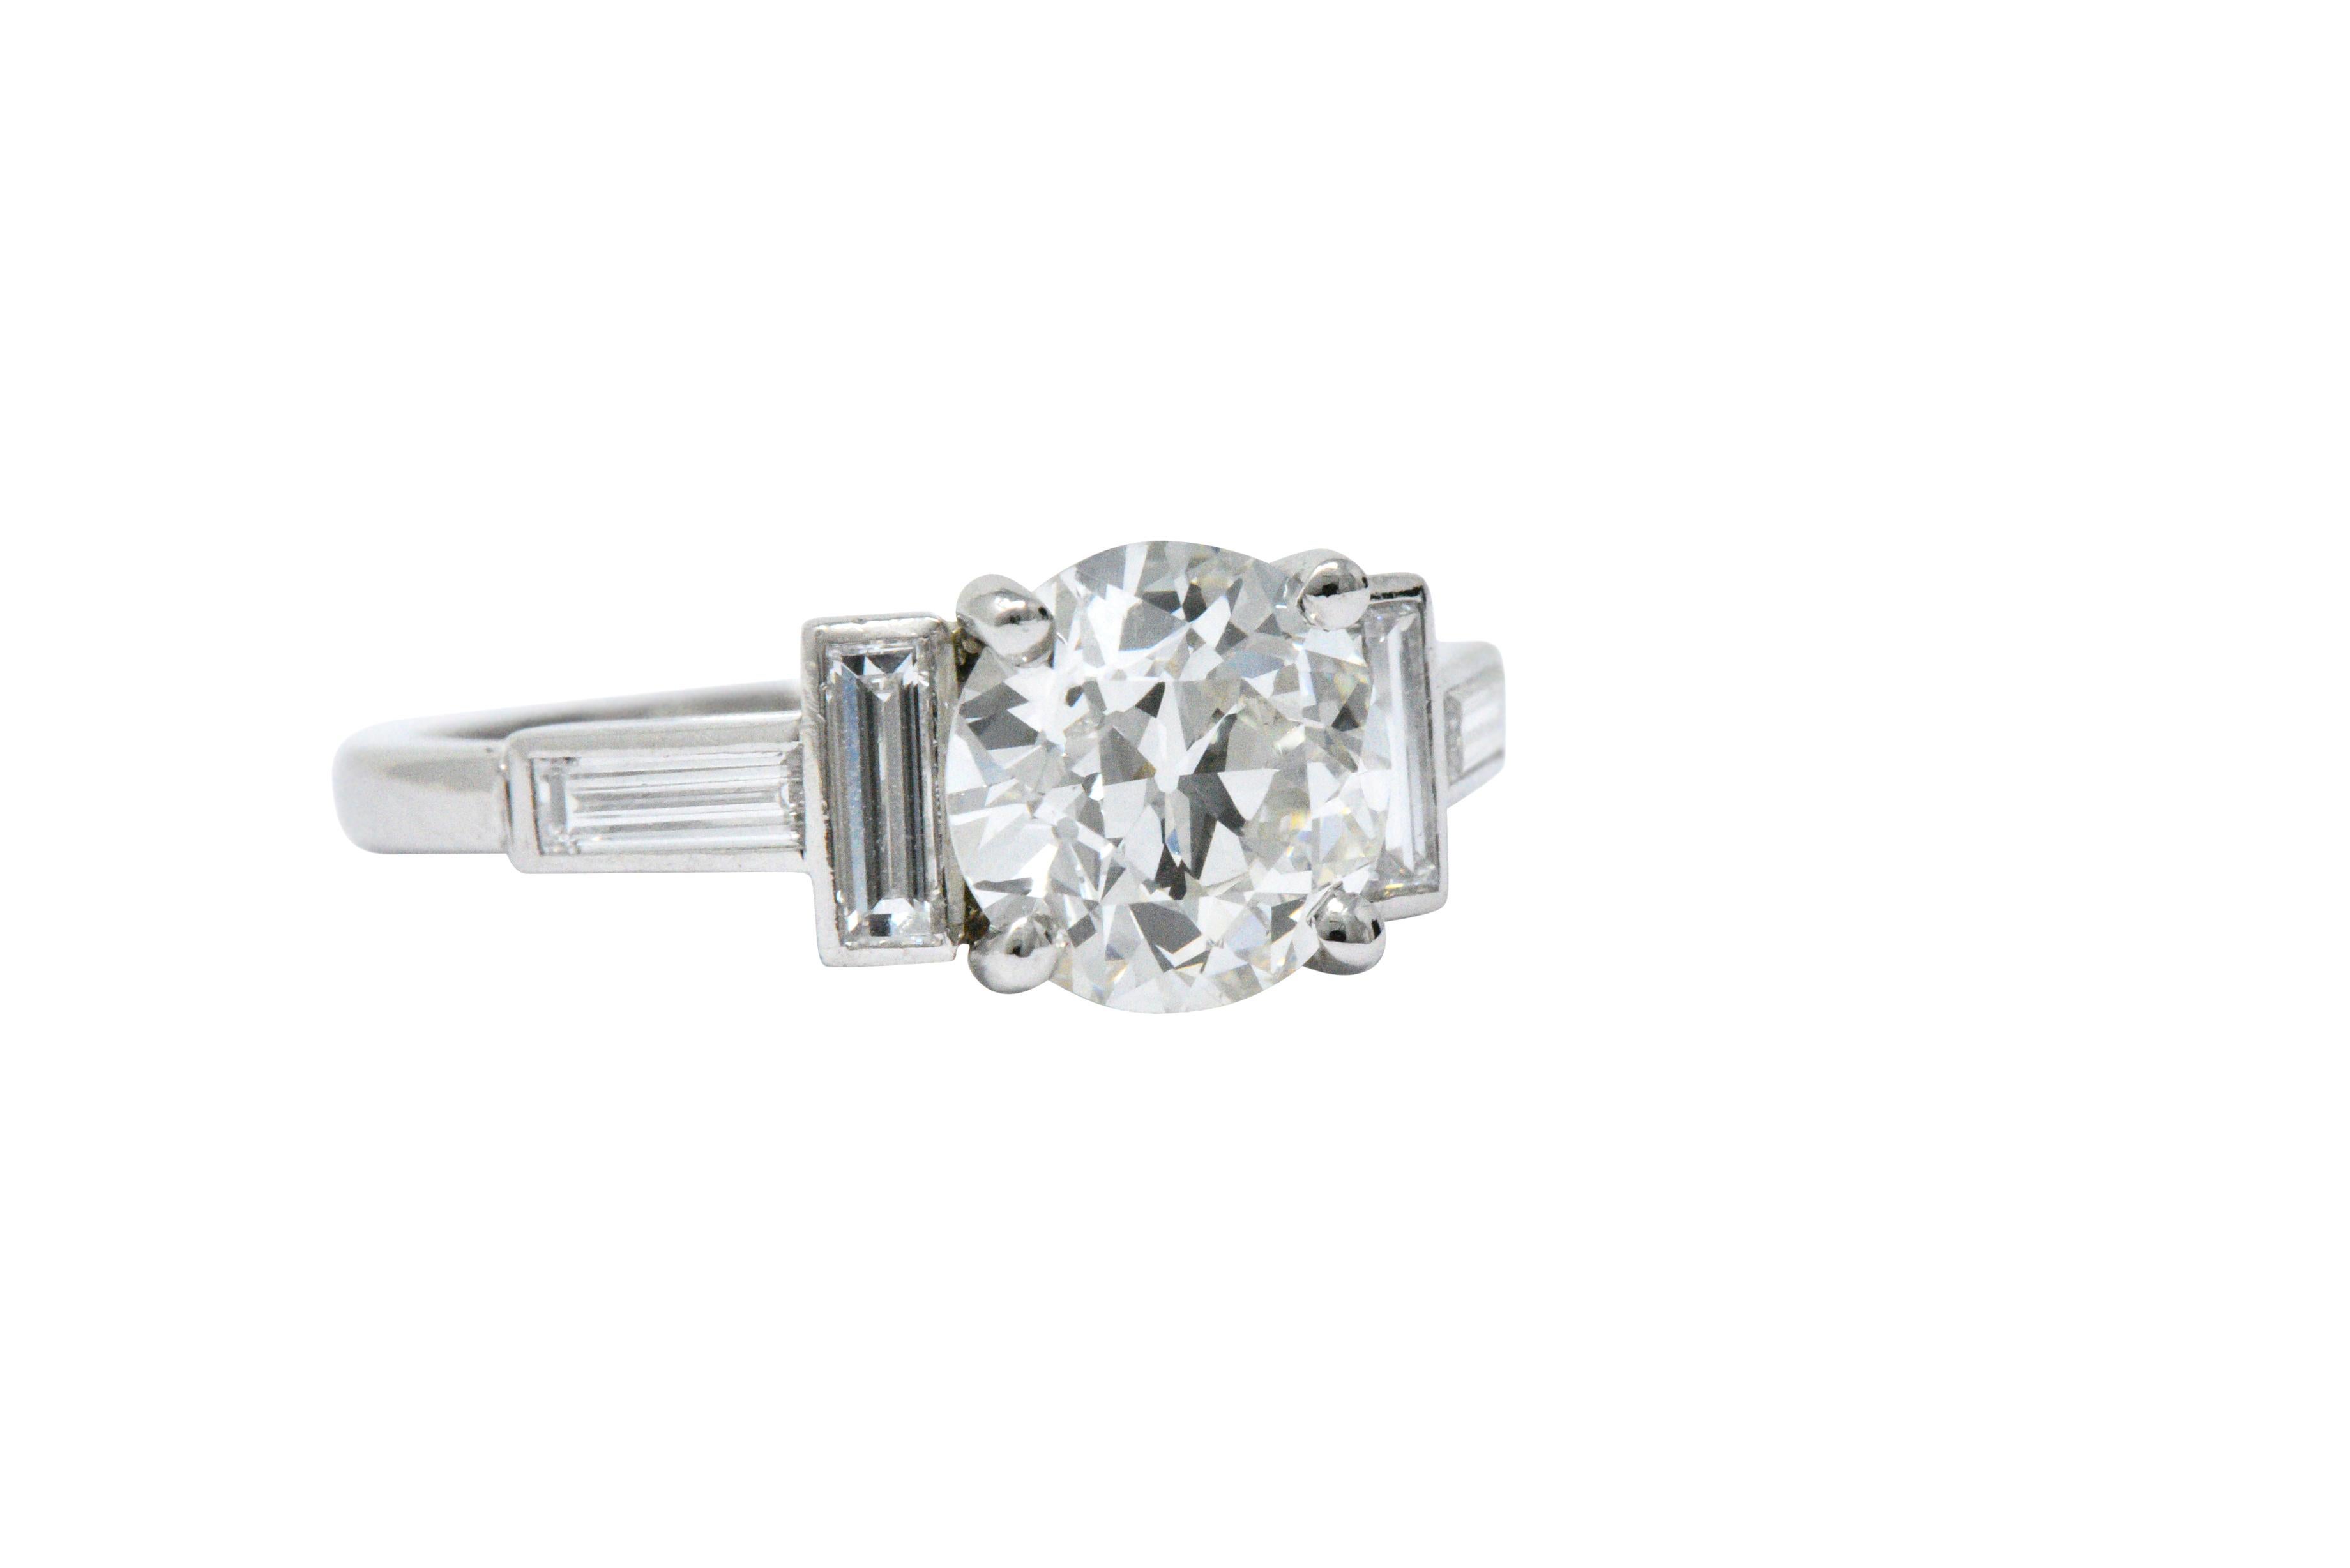 Centering a circular brilliant cut diamond weighing 1.62 carats, I color and VS2 clarity

Flanked by baguette cut diamonds, weighing approximately 0.40 carats total, G/H color and VS clarity

Fully signed Cartier on the side of the shank, numbered